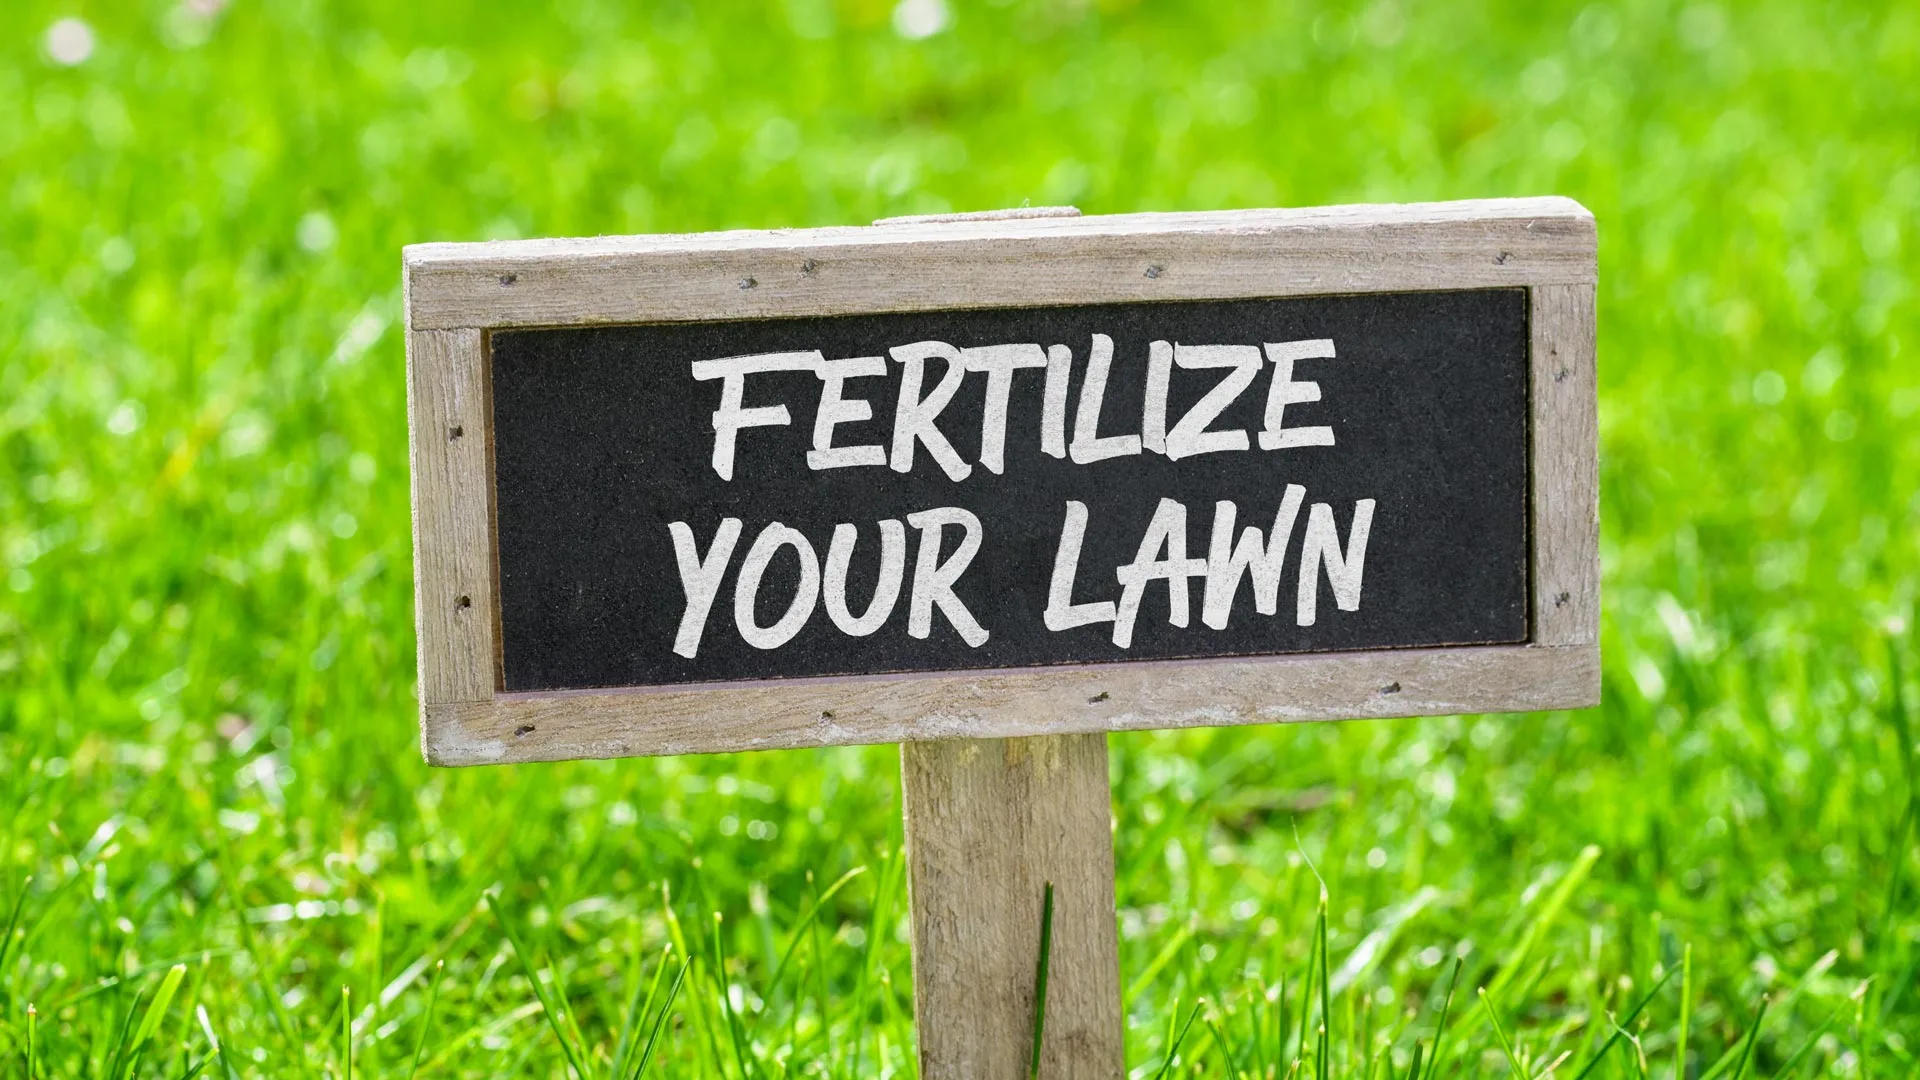 Don’t Forget to Schedule a Fertilization Treatment This Spring!